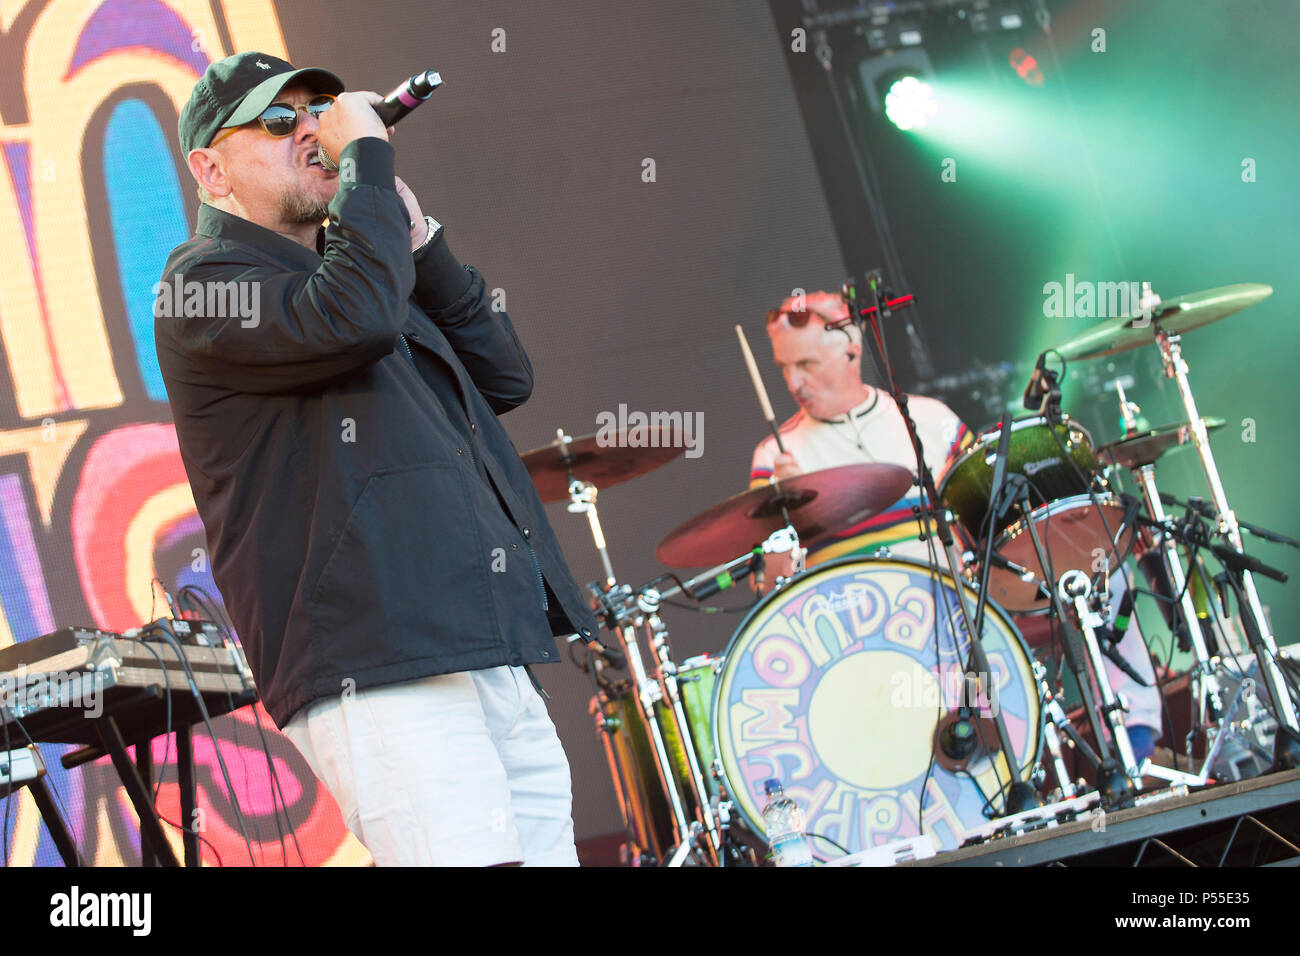 Edinburgh, UK. 24th June, 2018. The Happy Mondays in concert at The Sunday Sessions Scotland, Dalkeith Country Park, Edinburgh, Great Britain 24th June 2018 Credit: Stuart Westwood/Alamy Live News Stock Photo